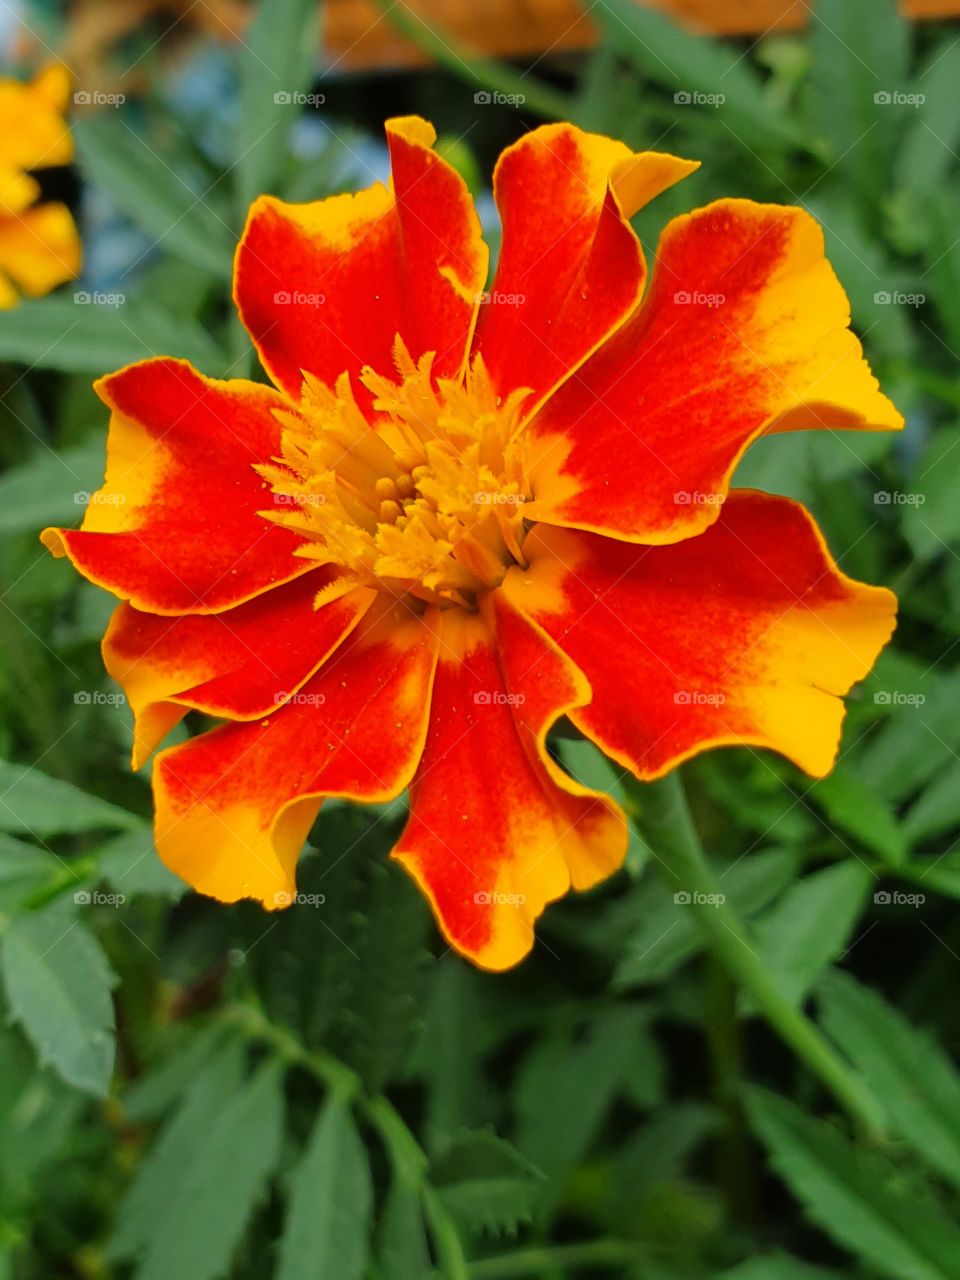 red and yellow flower in the garden closeup